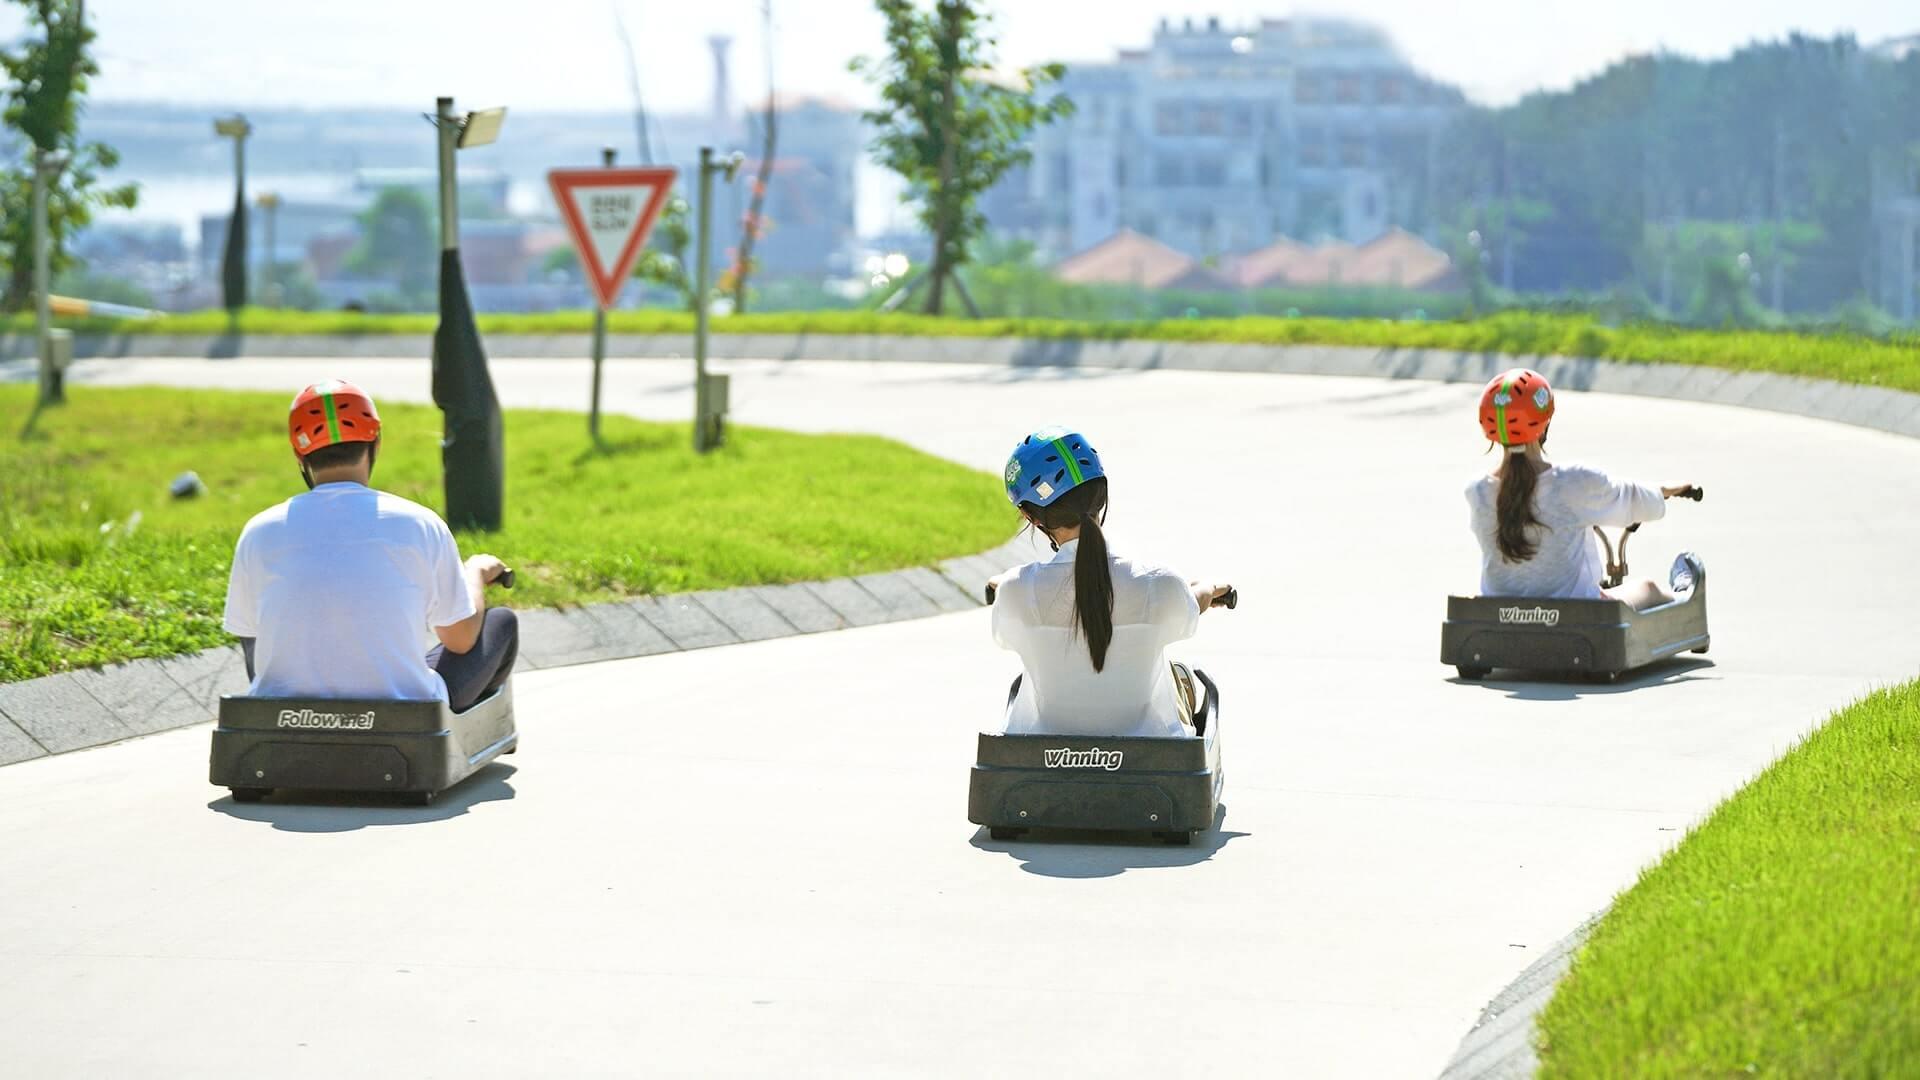 Three people race down the Luge tracks at Skyline Luge Busan.